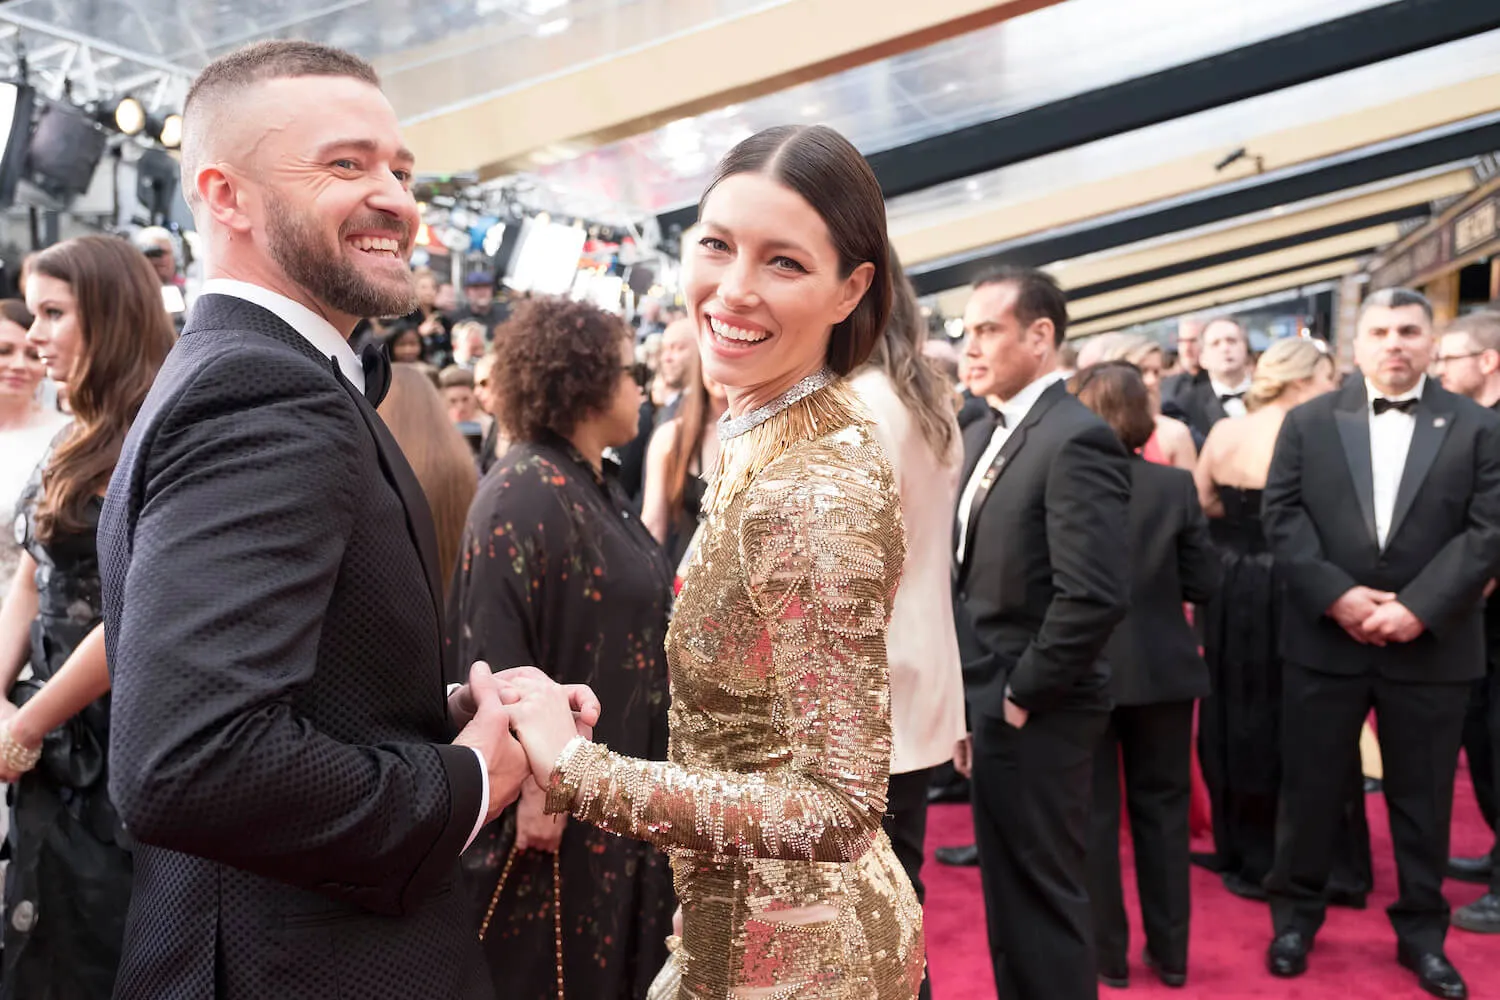 Justin Timberlake holding hands with Jessica Biel while on the red carpet for the 89th Academy Awards. They're both smiling and looking at the camera behind them.